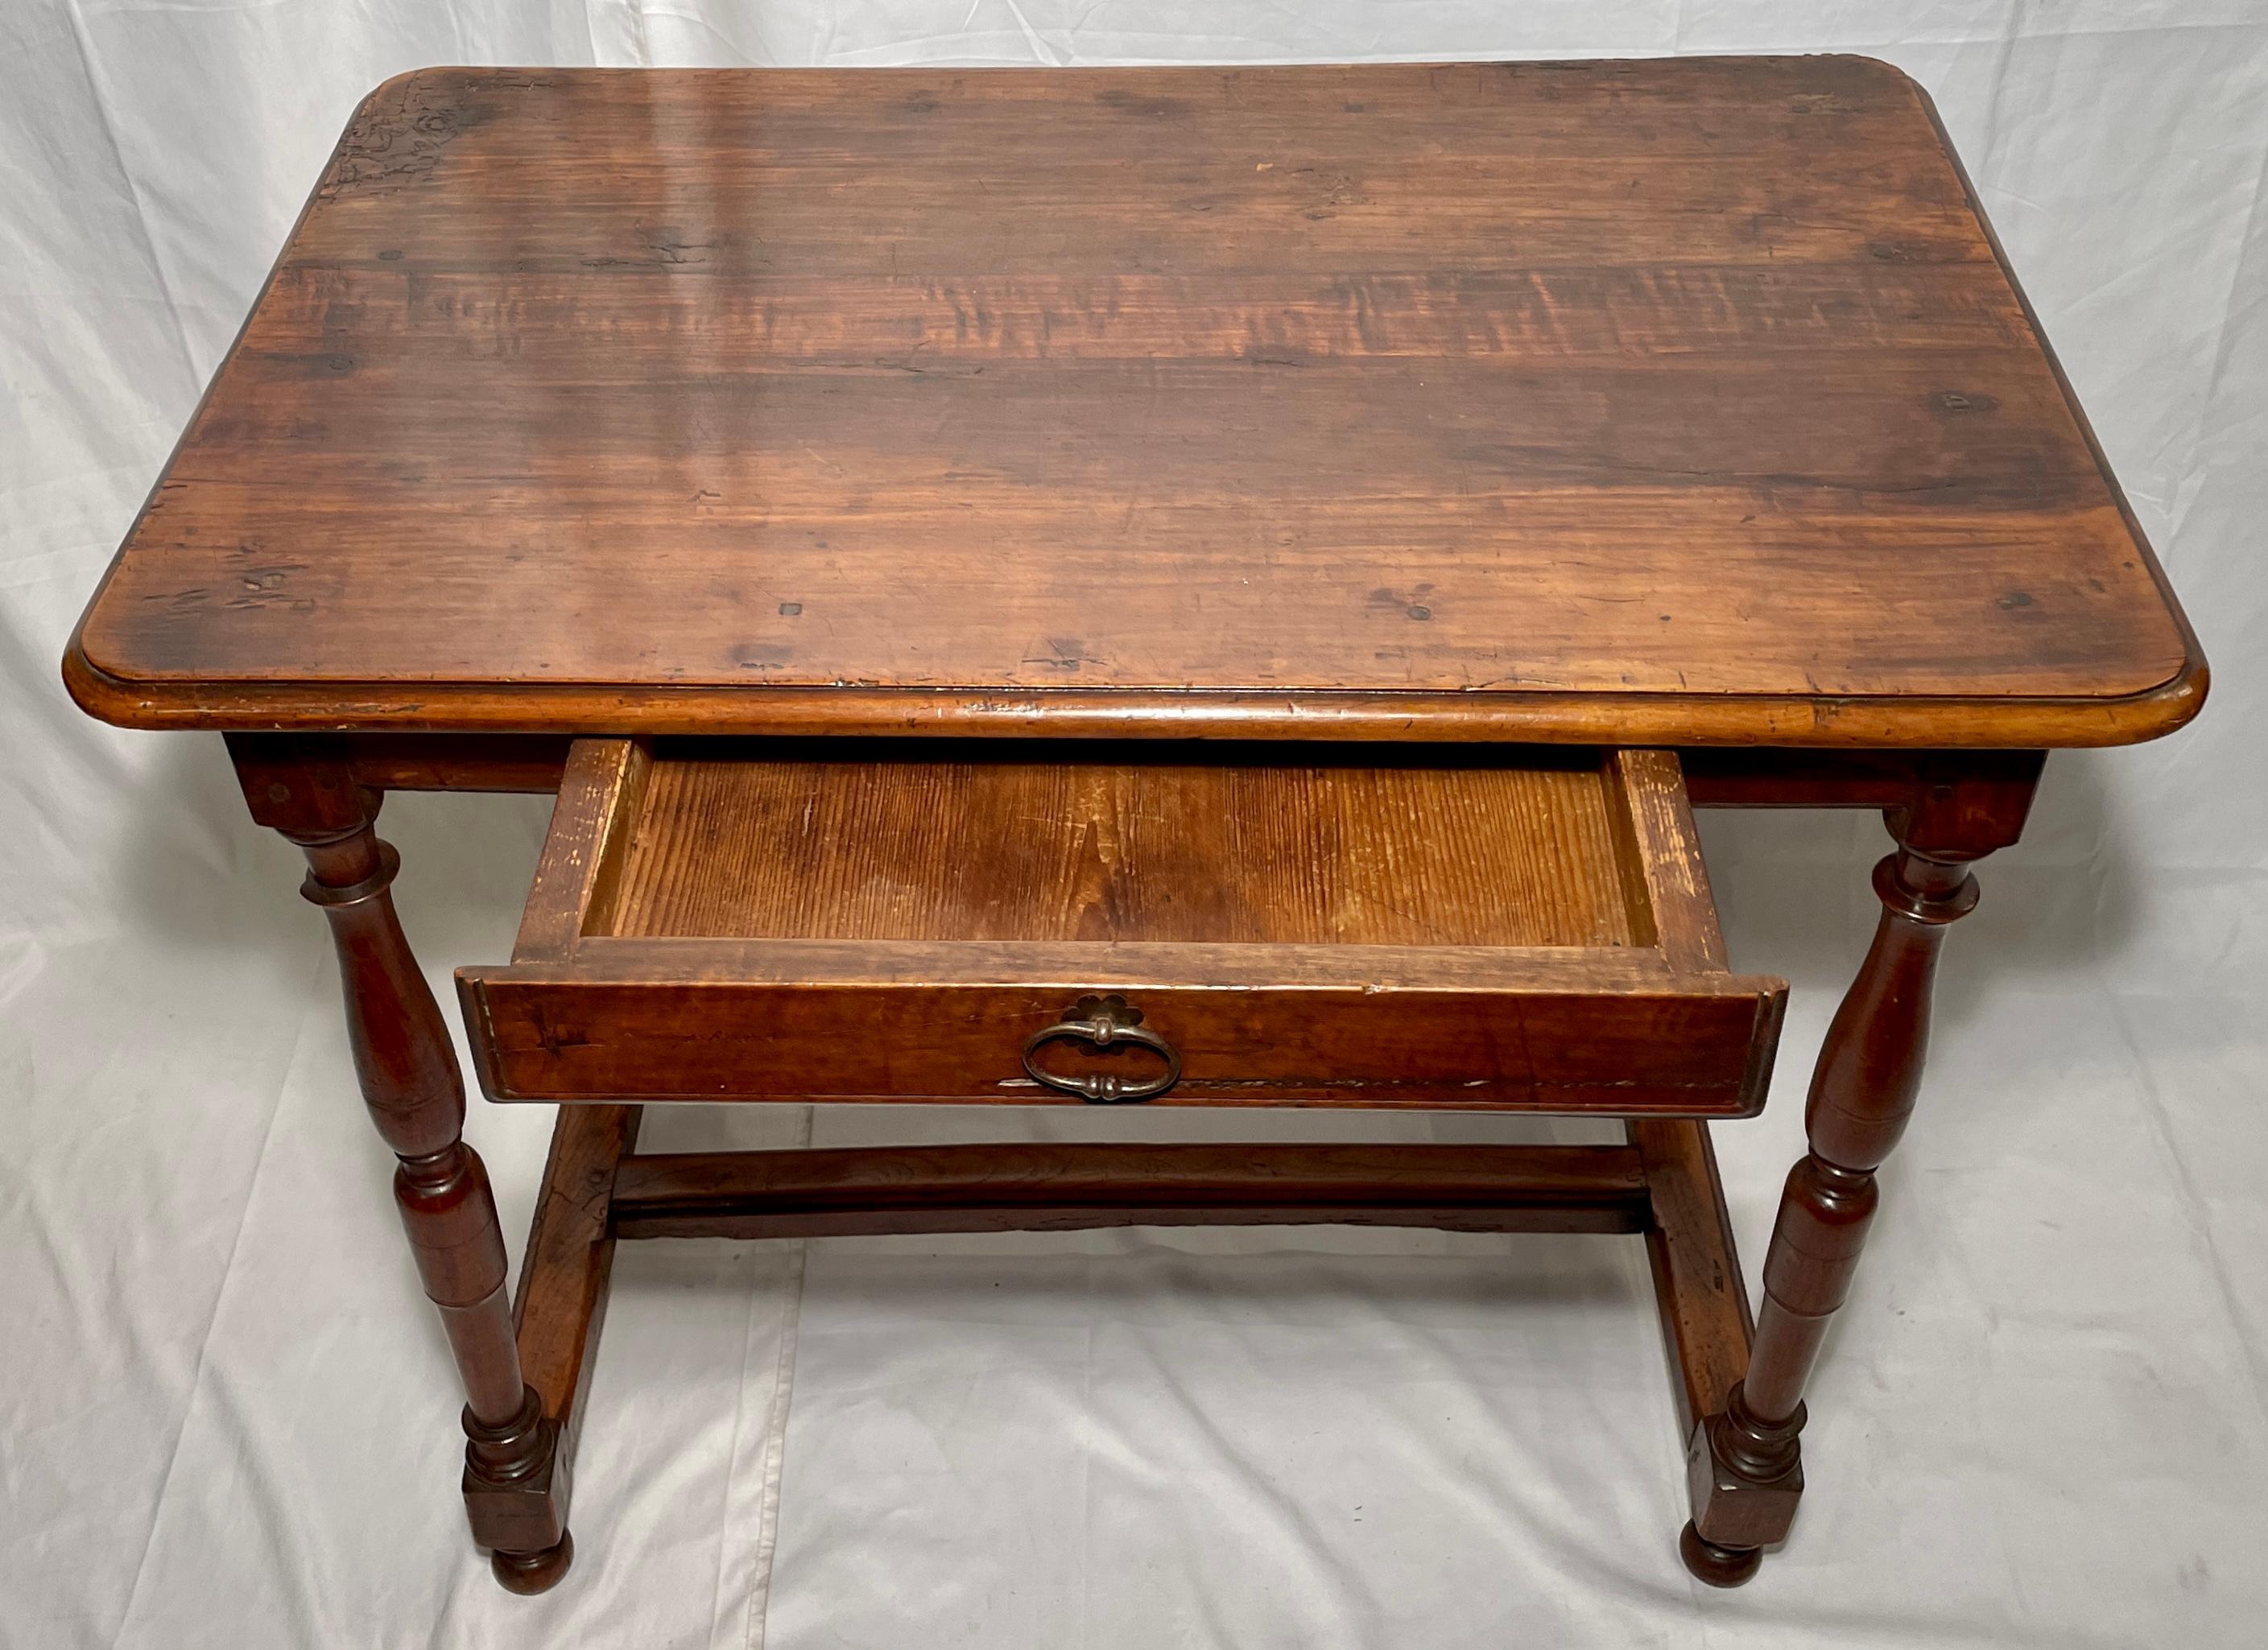 Antique French Country Walnut Table, circa 1890s-1900s In Good Condition For Sale In New Orleans, LA